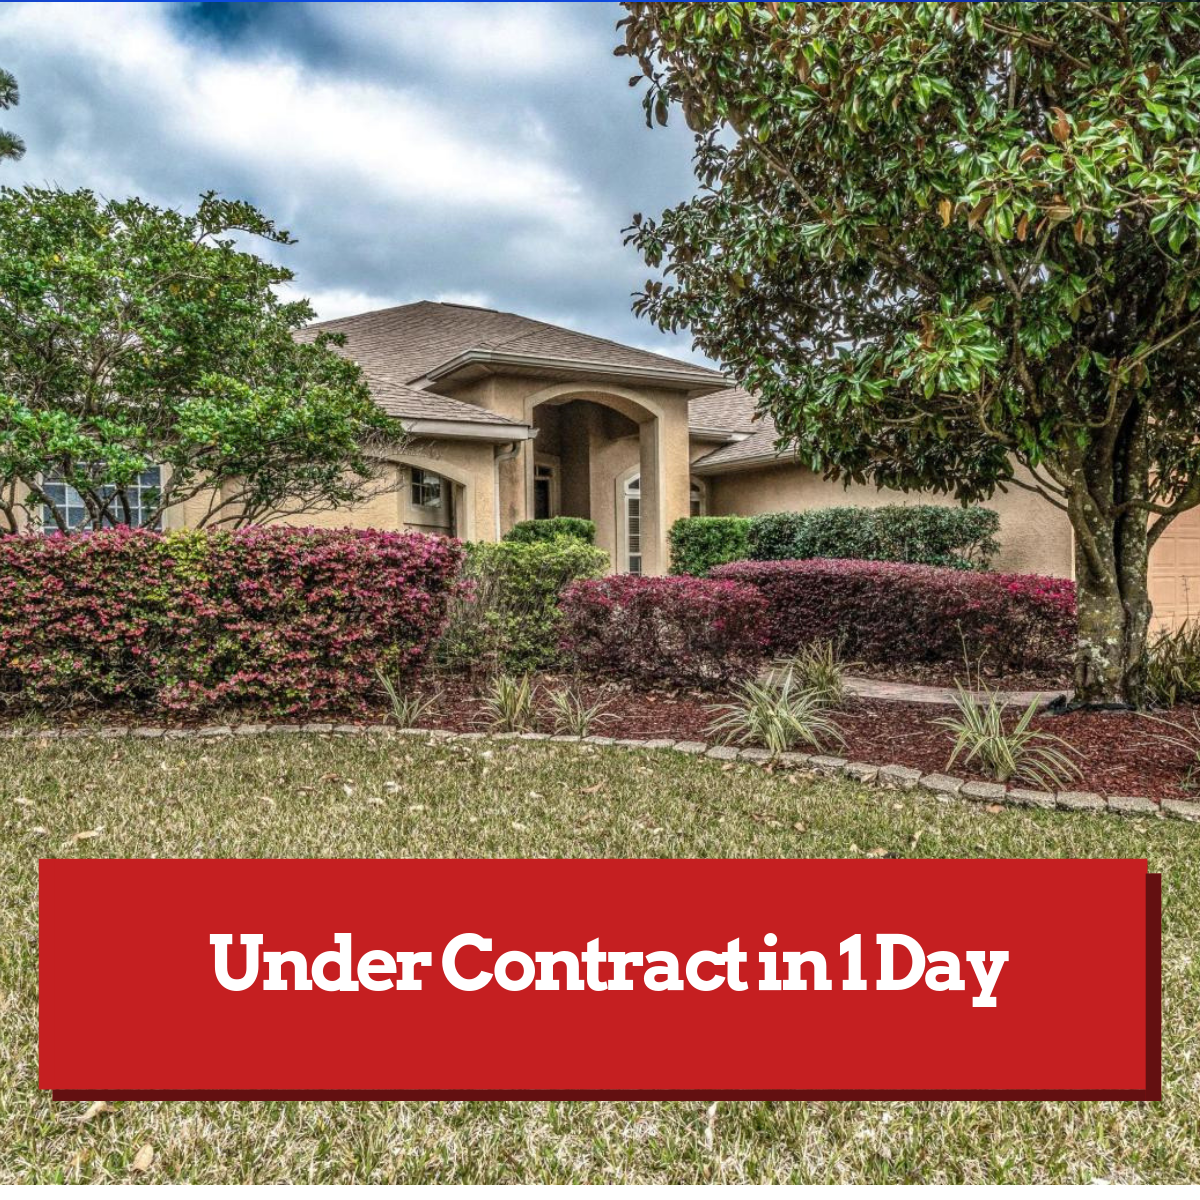 Niceville home under contract in 1 day